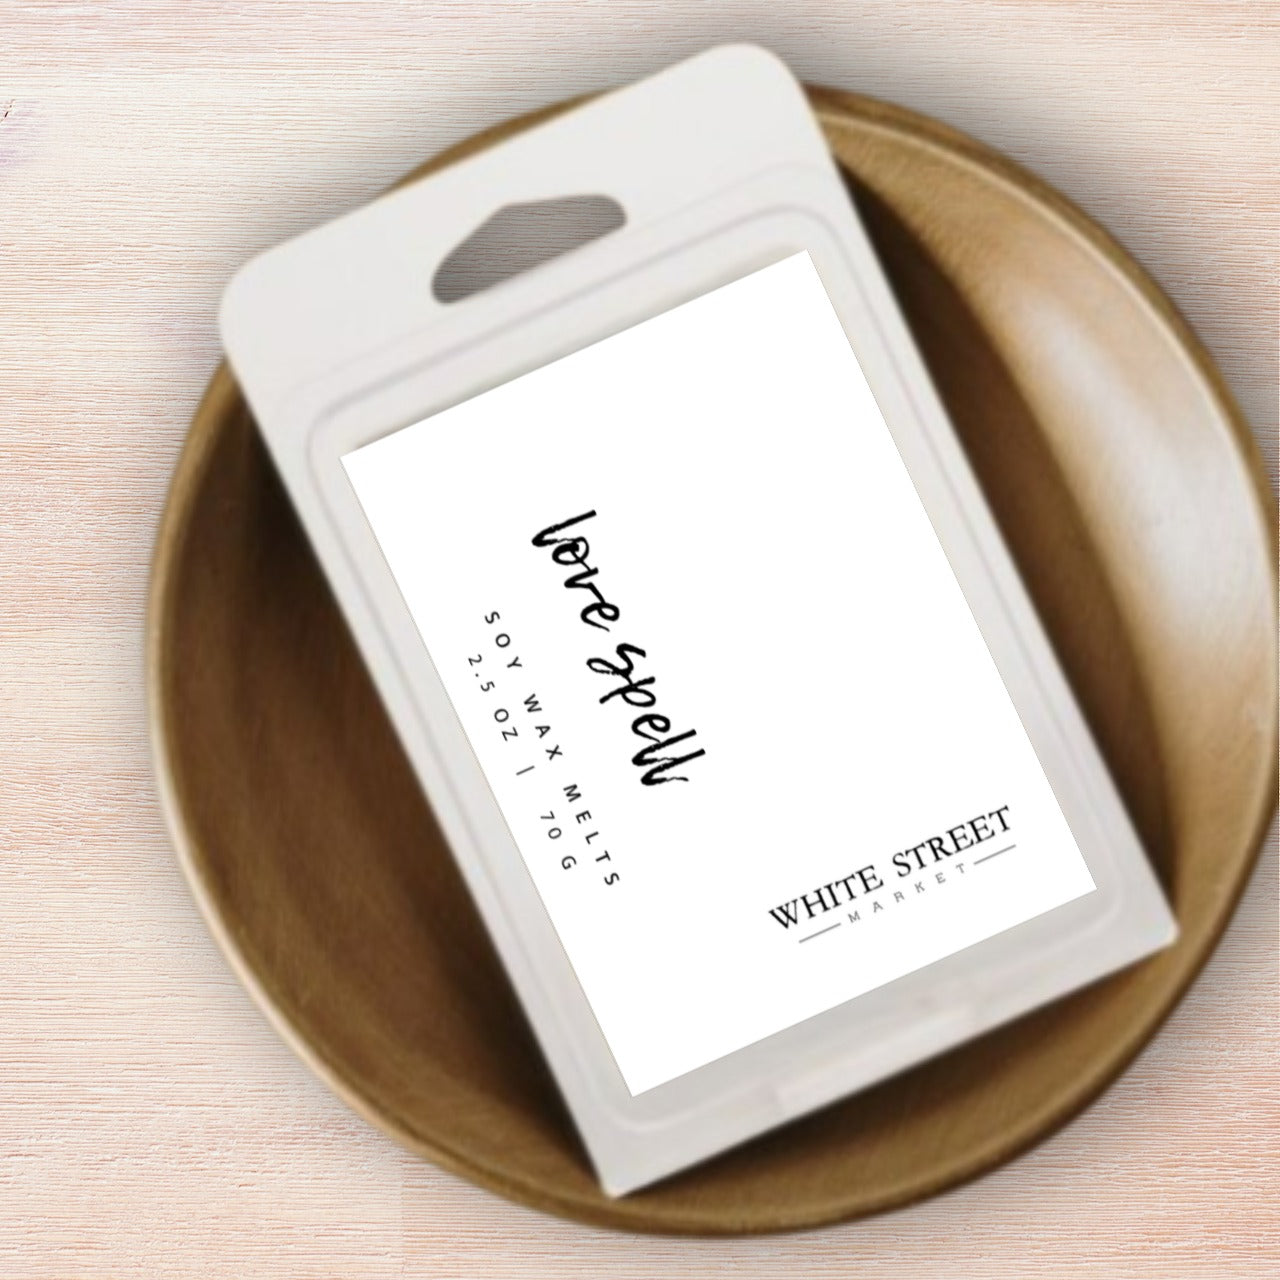 Load image into Gallery viewer, Love Spell Wax Melts - White Street Market
